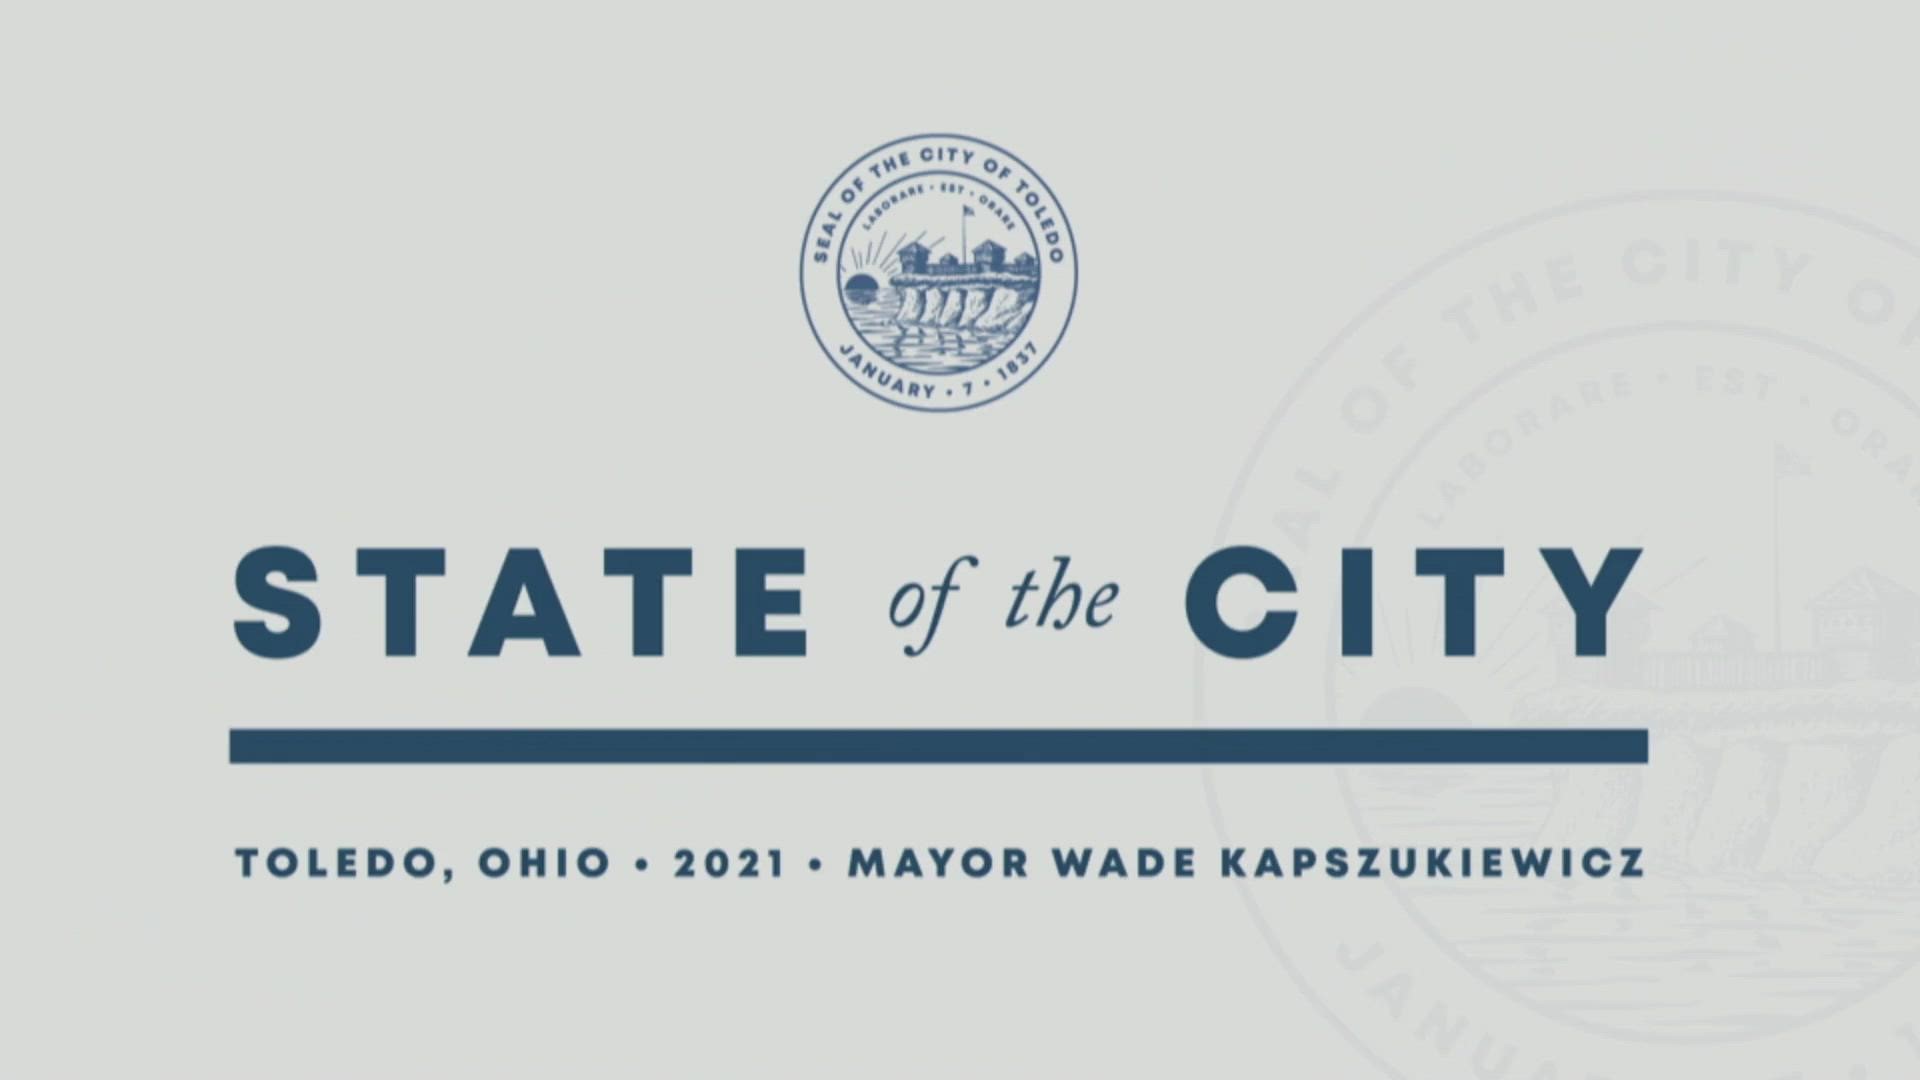 Mayor Wade Kapszukiewicz delivered the 2021 State of the City address virtually from the Toledo Museum of Art's Peristyle Theater.